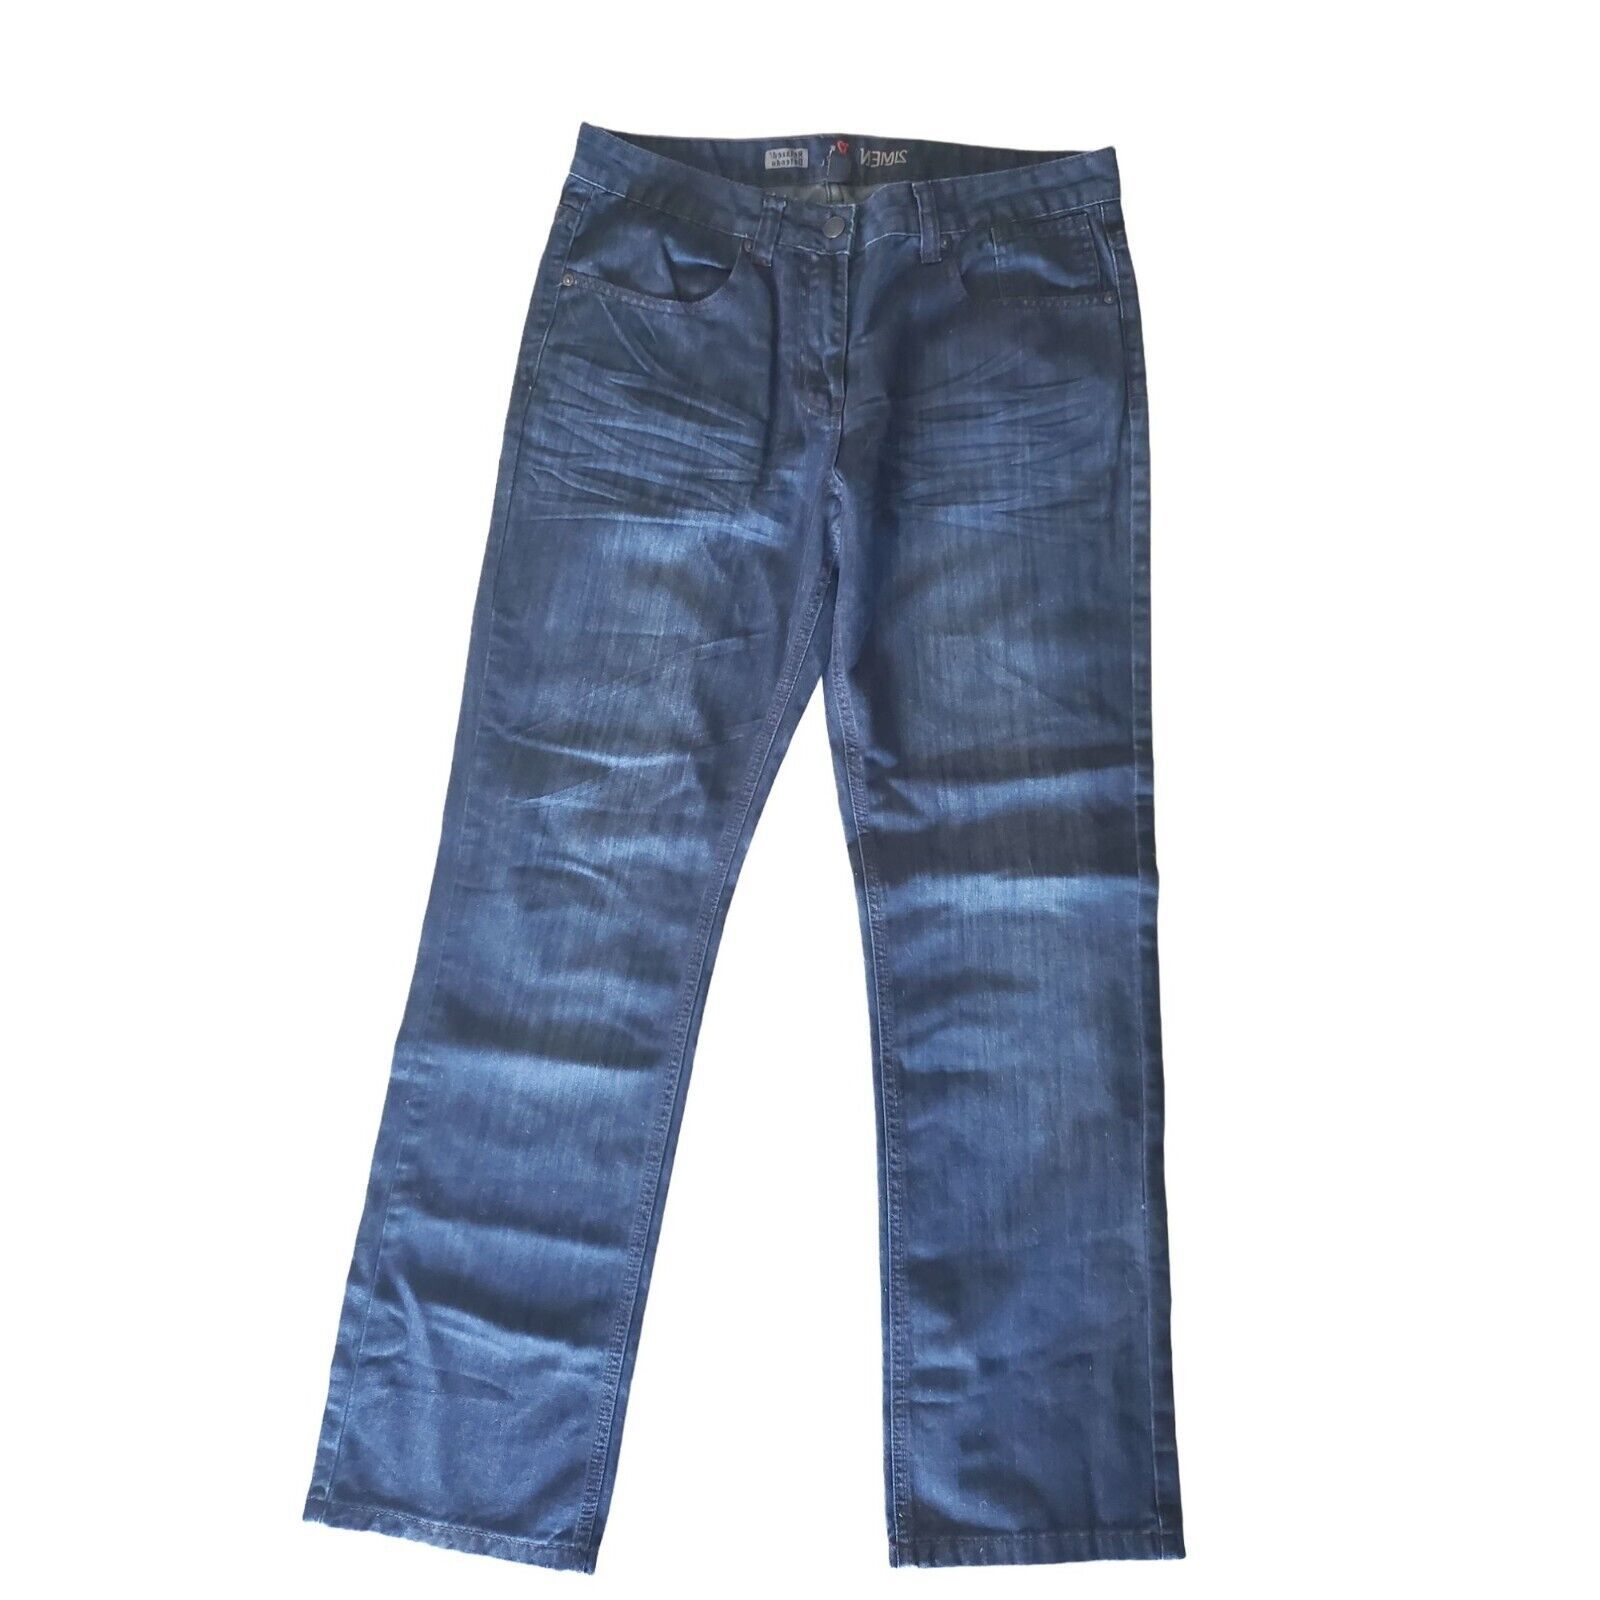 Primary image for 21 Men Jeans 32X32 Mens Relaxed Fit High Rise Straight Leg Dark Wash Casual